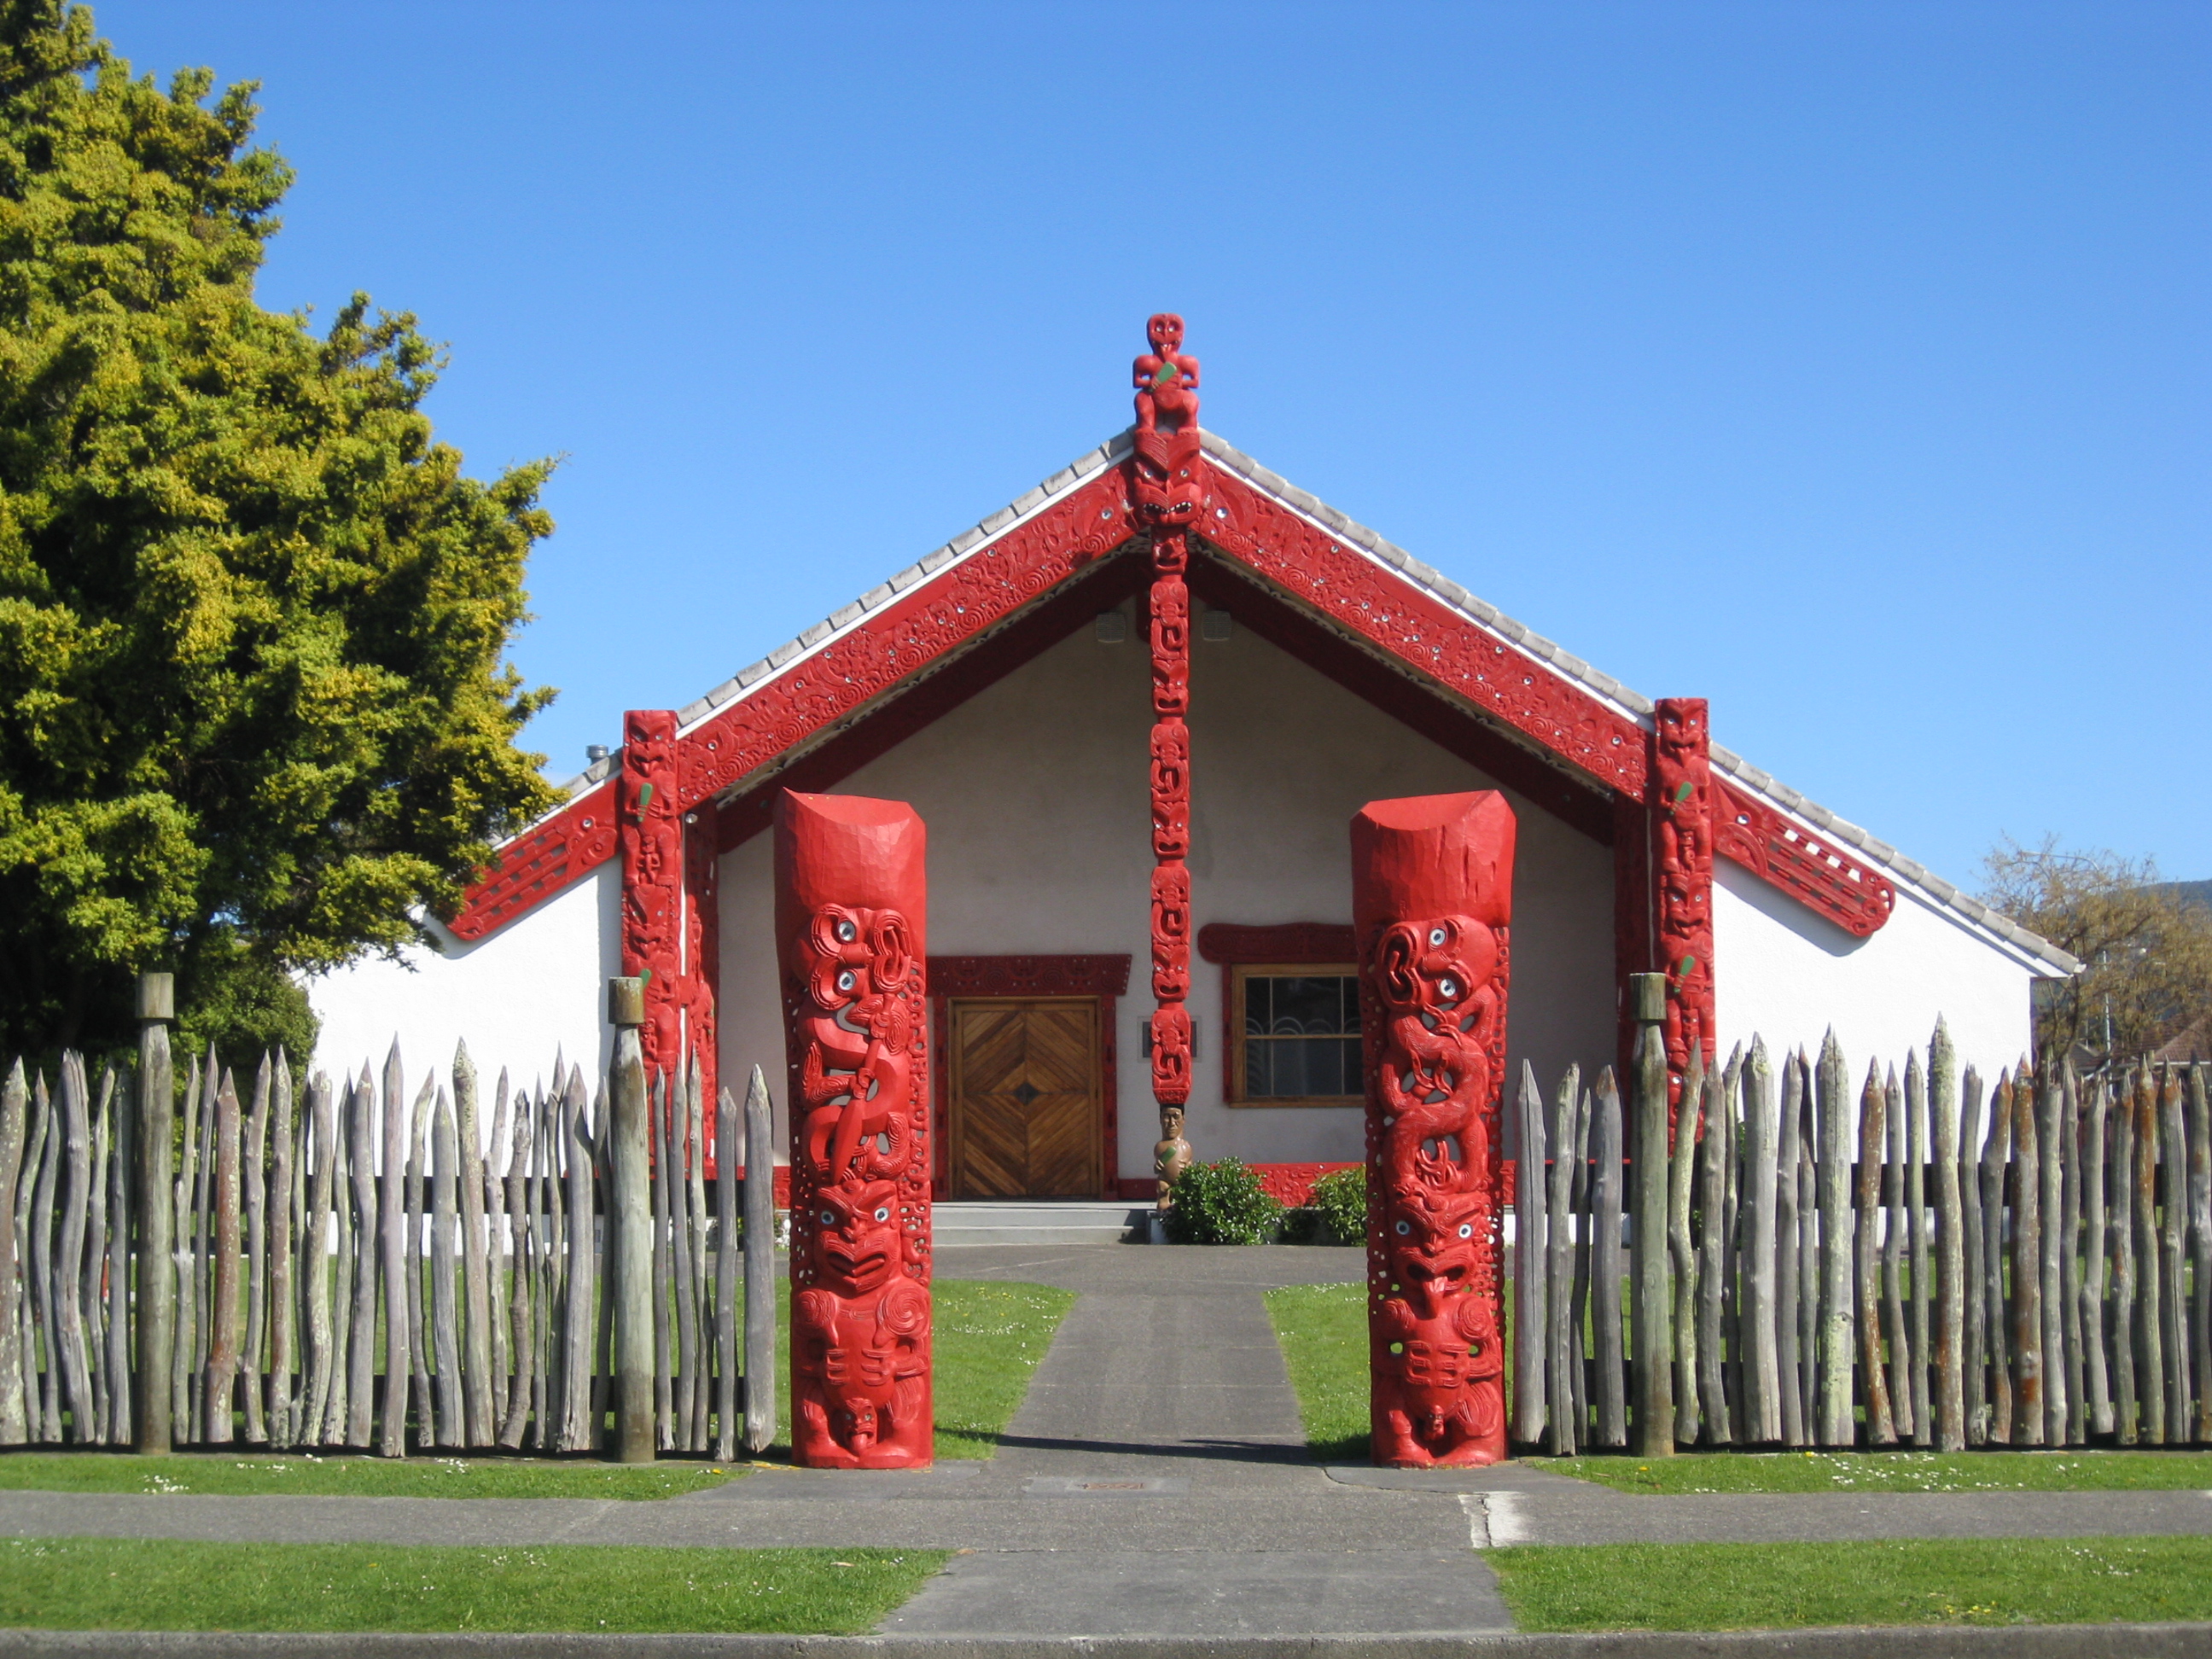 View of Waiwhetū Marae from the street, including the fence and waharoa